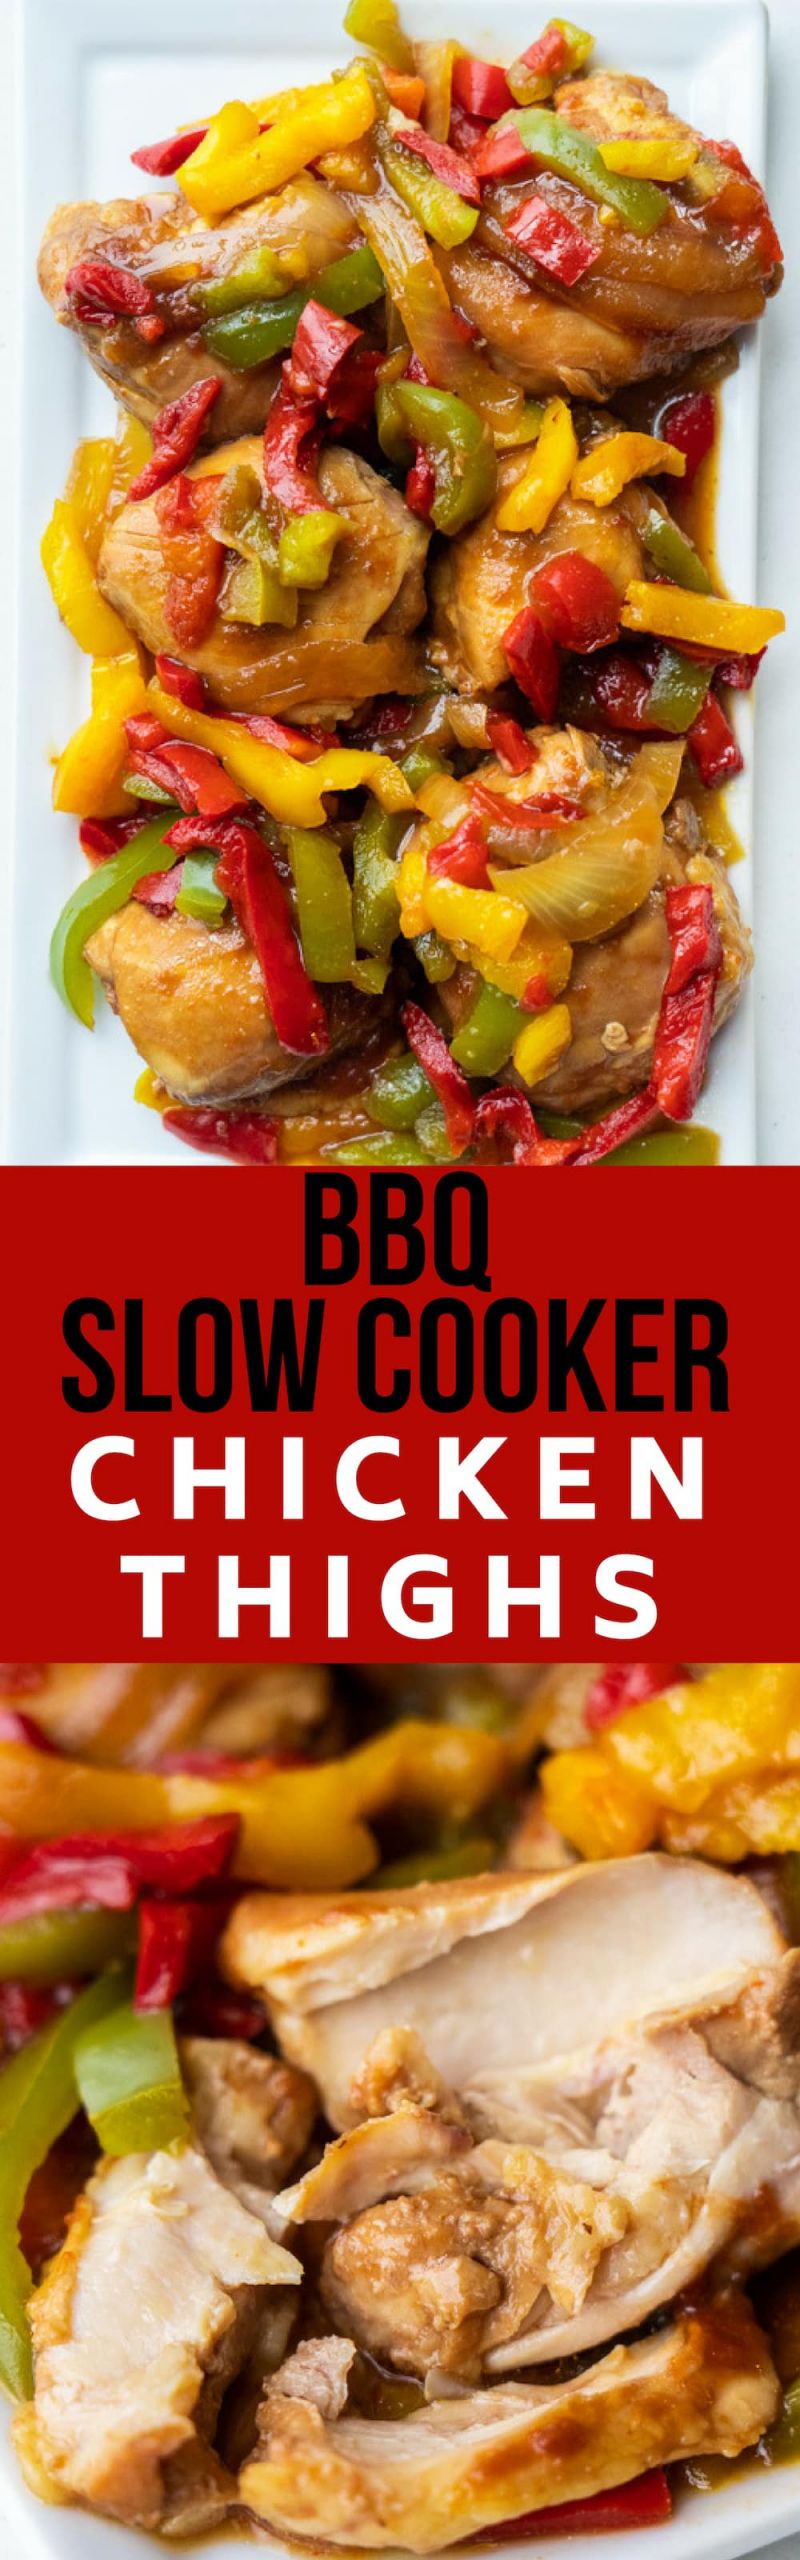 Slow Cooker Chicken Thighs Rice
 BBQ Slow Cooker Chicken Thighs Ready in ly 2 Hours